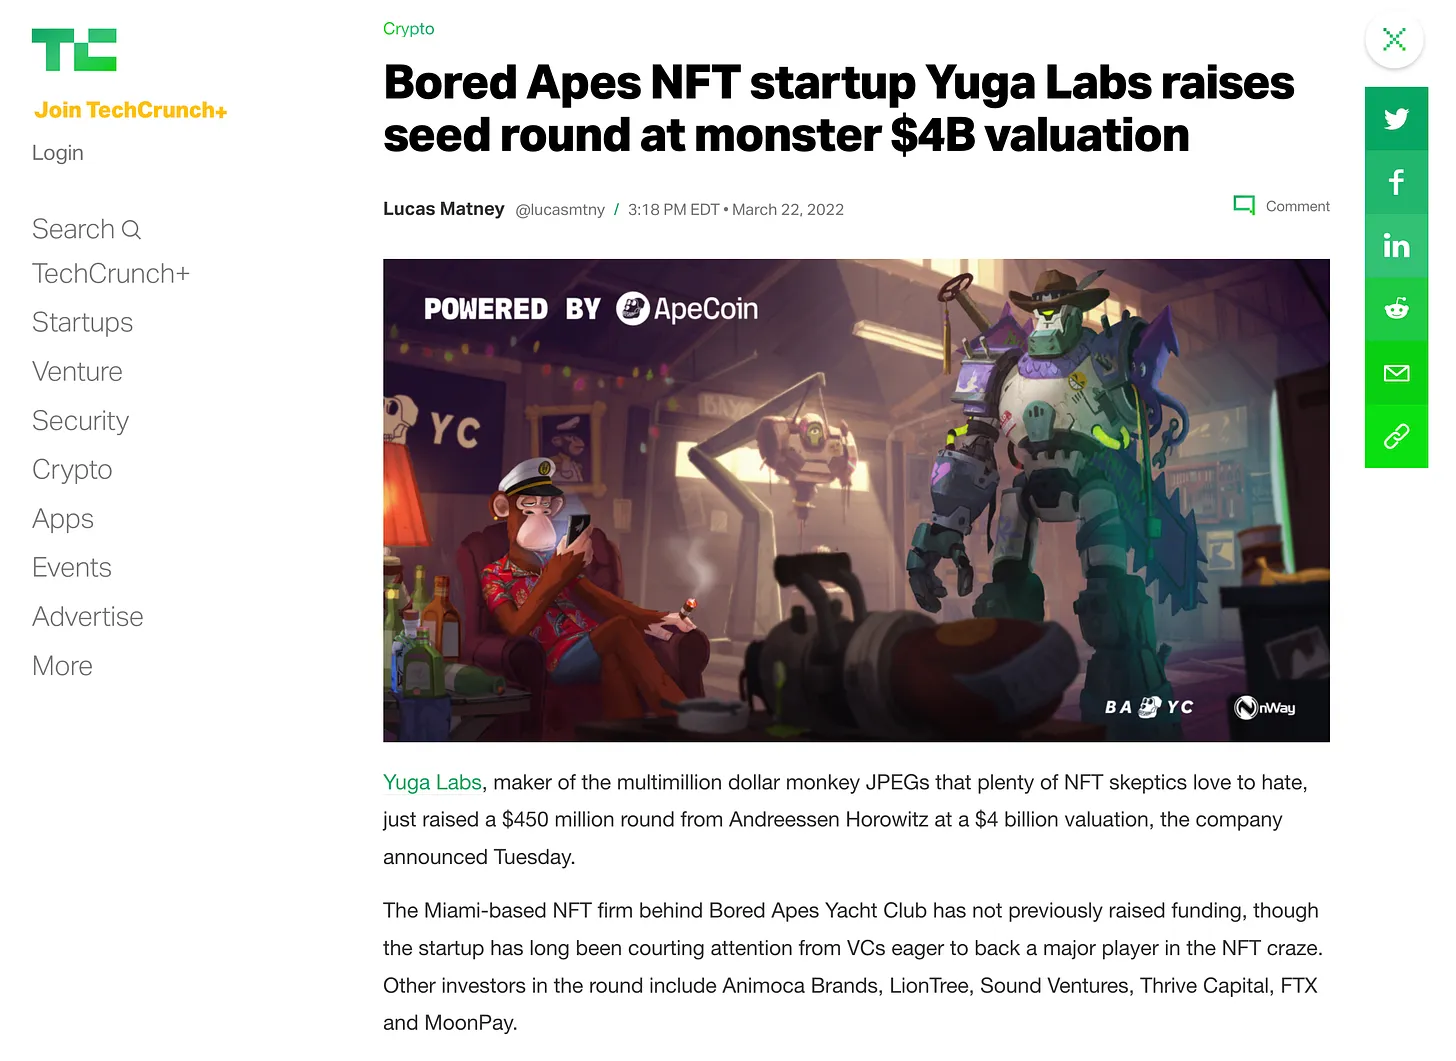 Yuga Labs Raises at a $4B Valuation In Less Than 18 months from inception